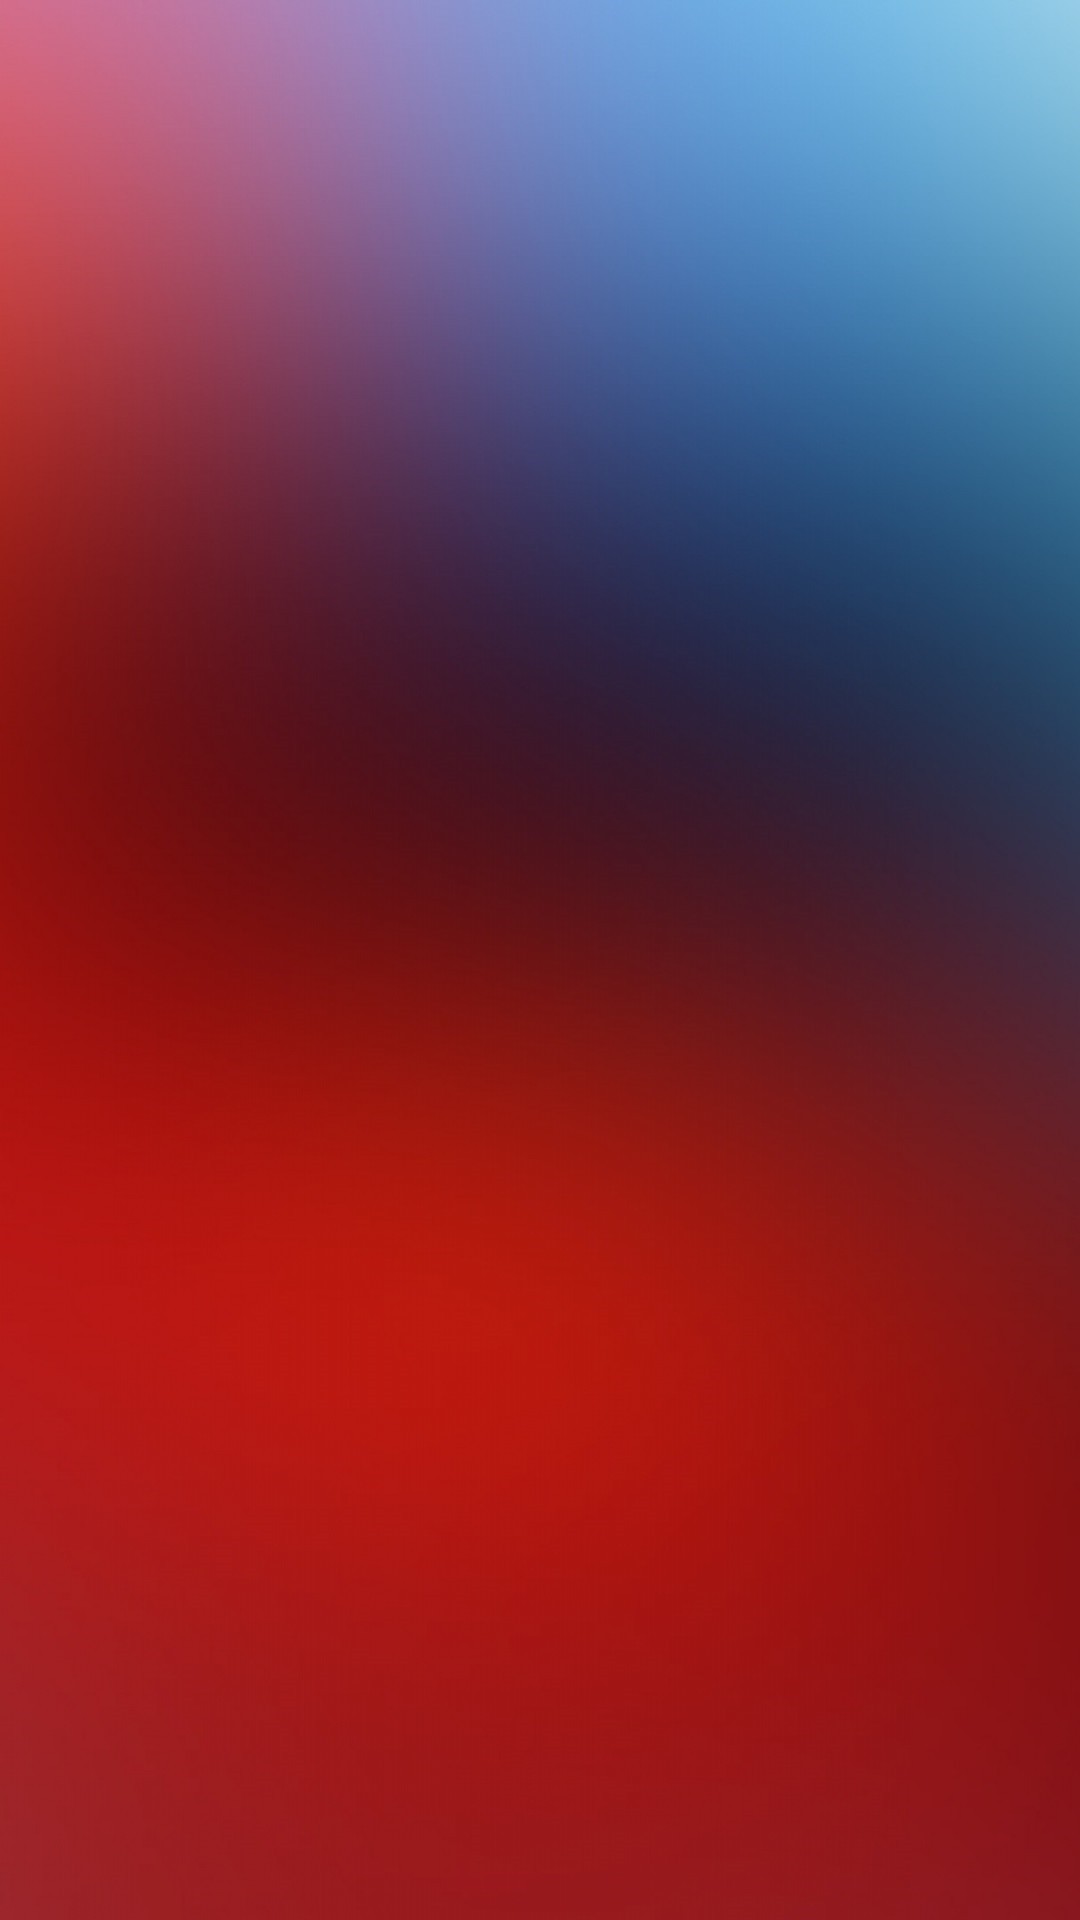 Red And Blue lock screen wallpaper